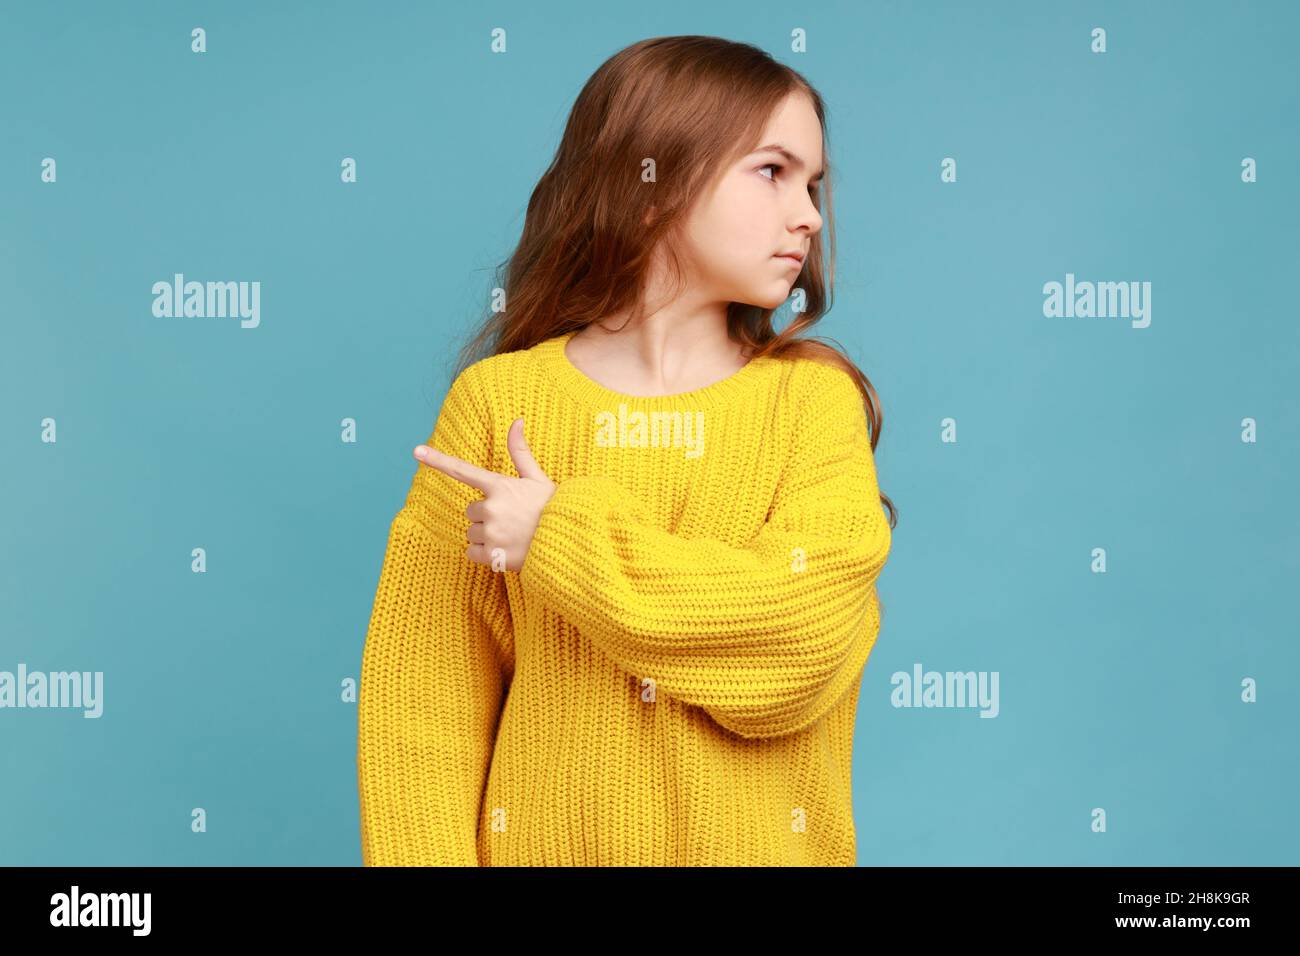 Portrait of little girl pointing way out showing exit, asking to leave her alone, feeling resentful, wearing yellow casual style sweater. Indoor studio shot isolated on blue background. Stock Photo